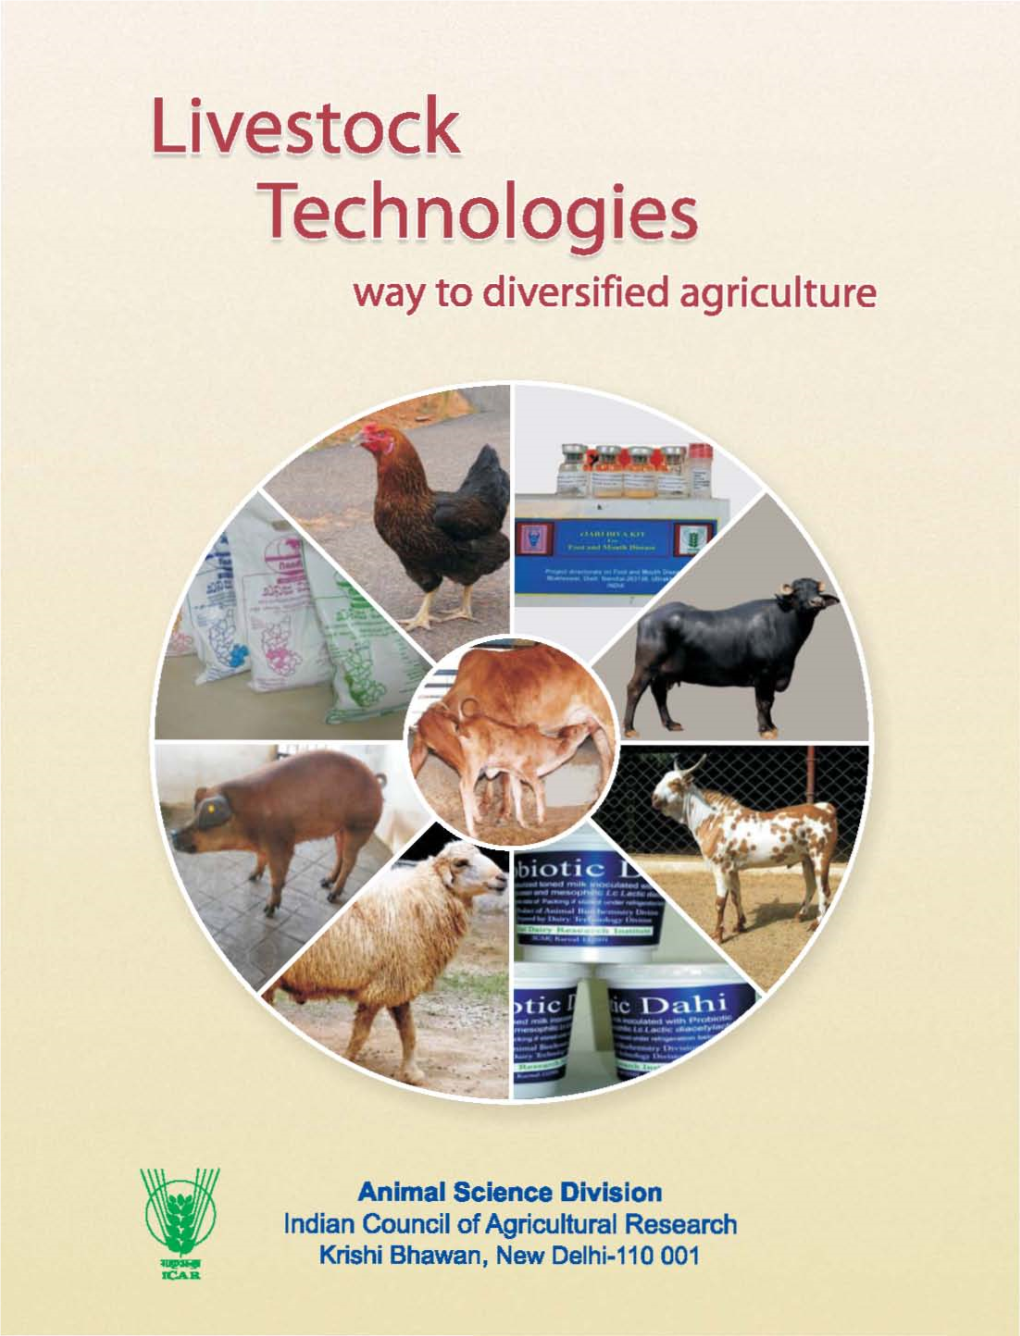 Livestock Technologies Way to Diversified Agriculture